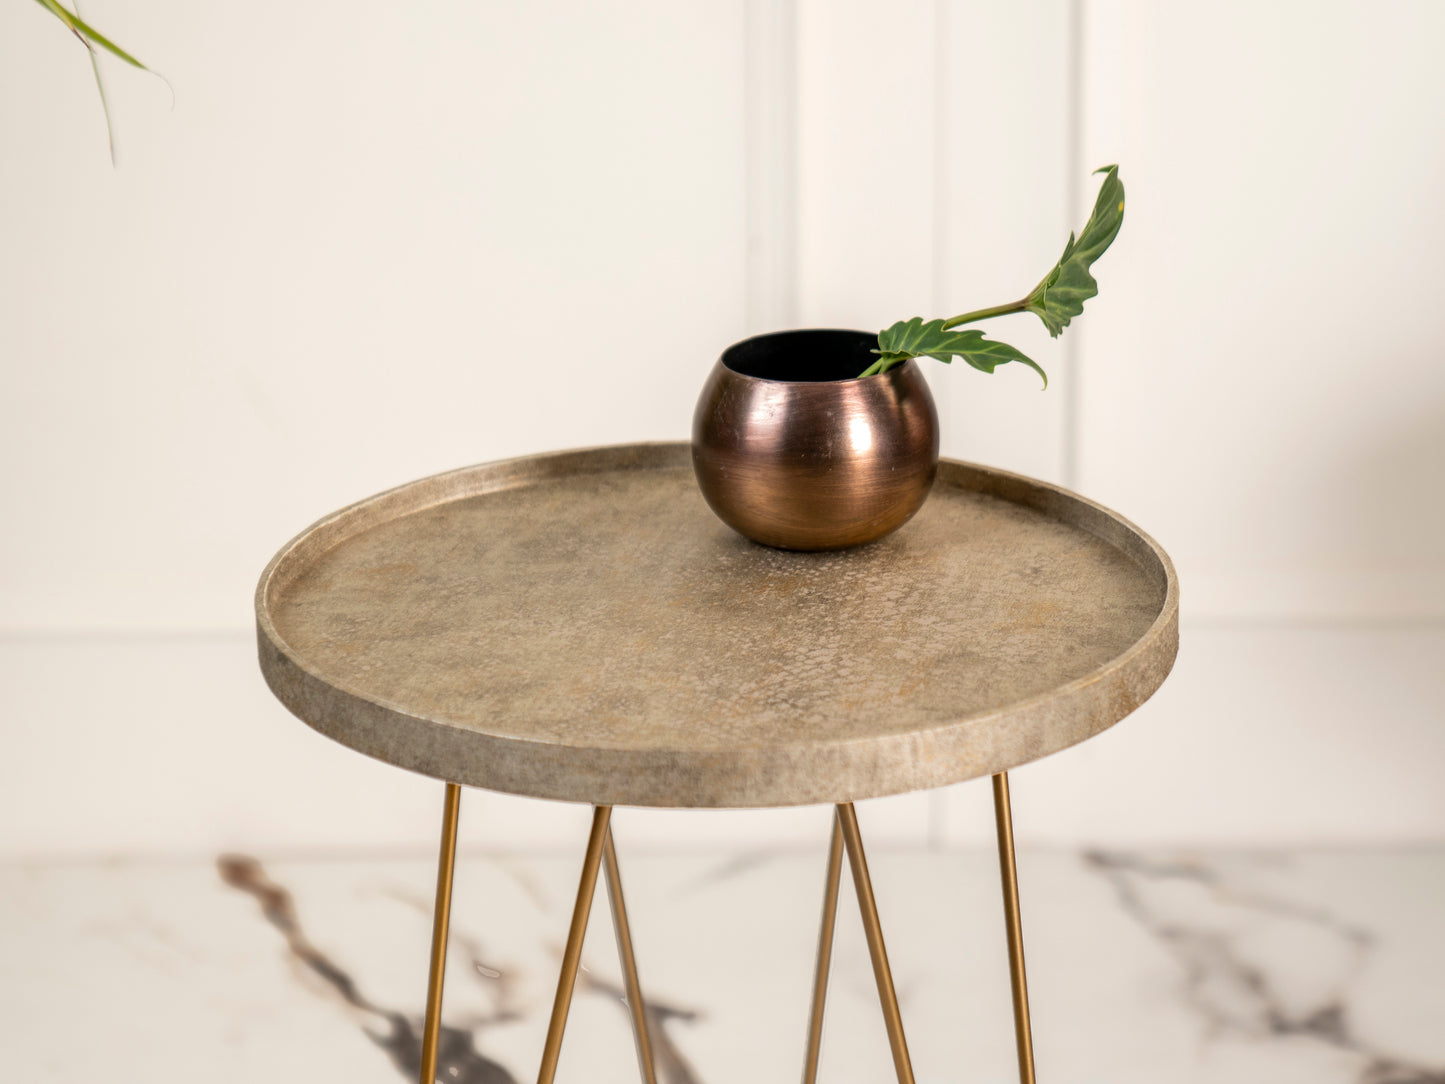 Transcendent Tinge Dark Gold Side Tables with Hairpin Legs, Wooden Tables, Living Room Decor by A Tiny Mistake